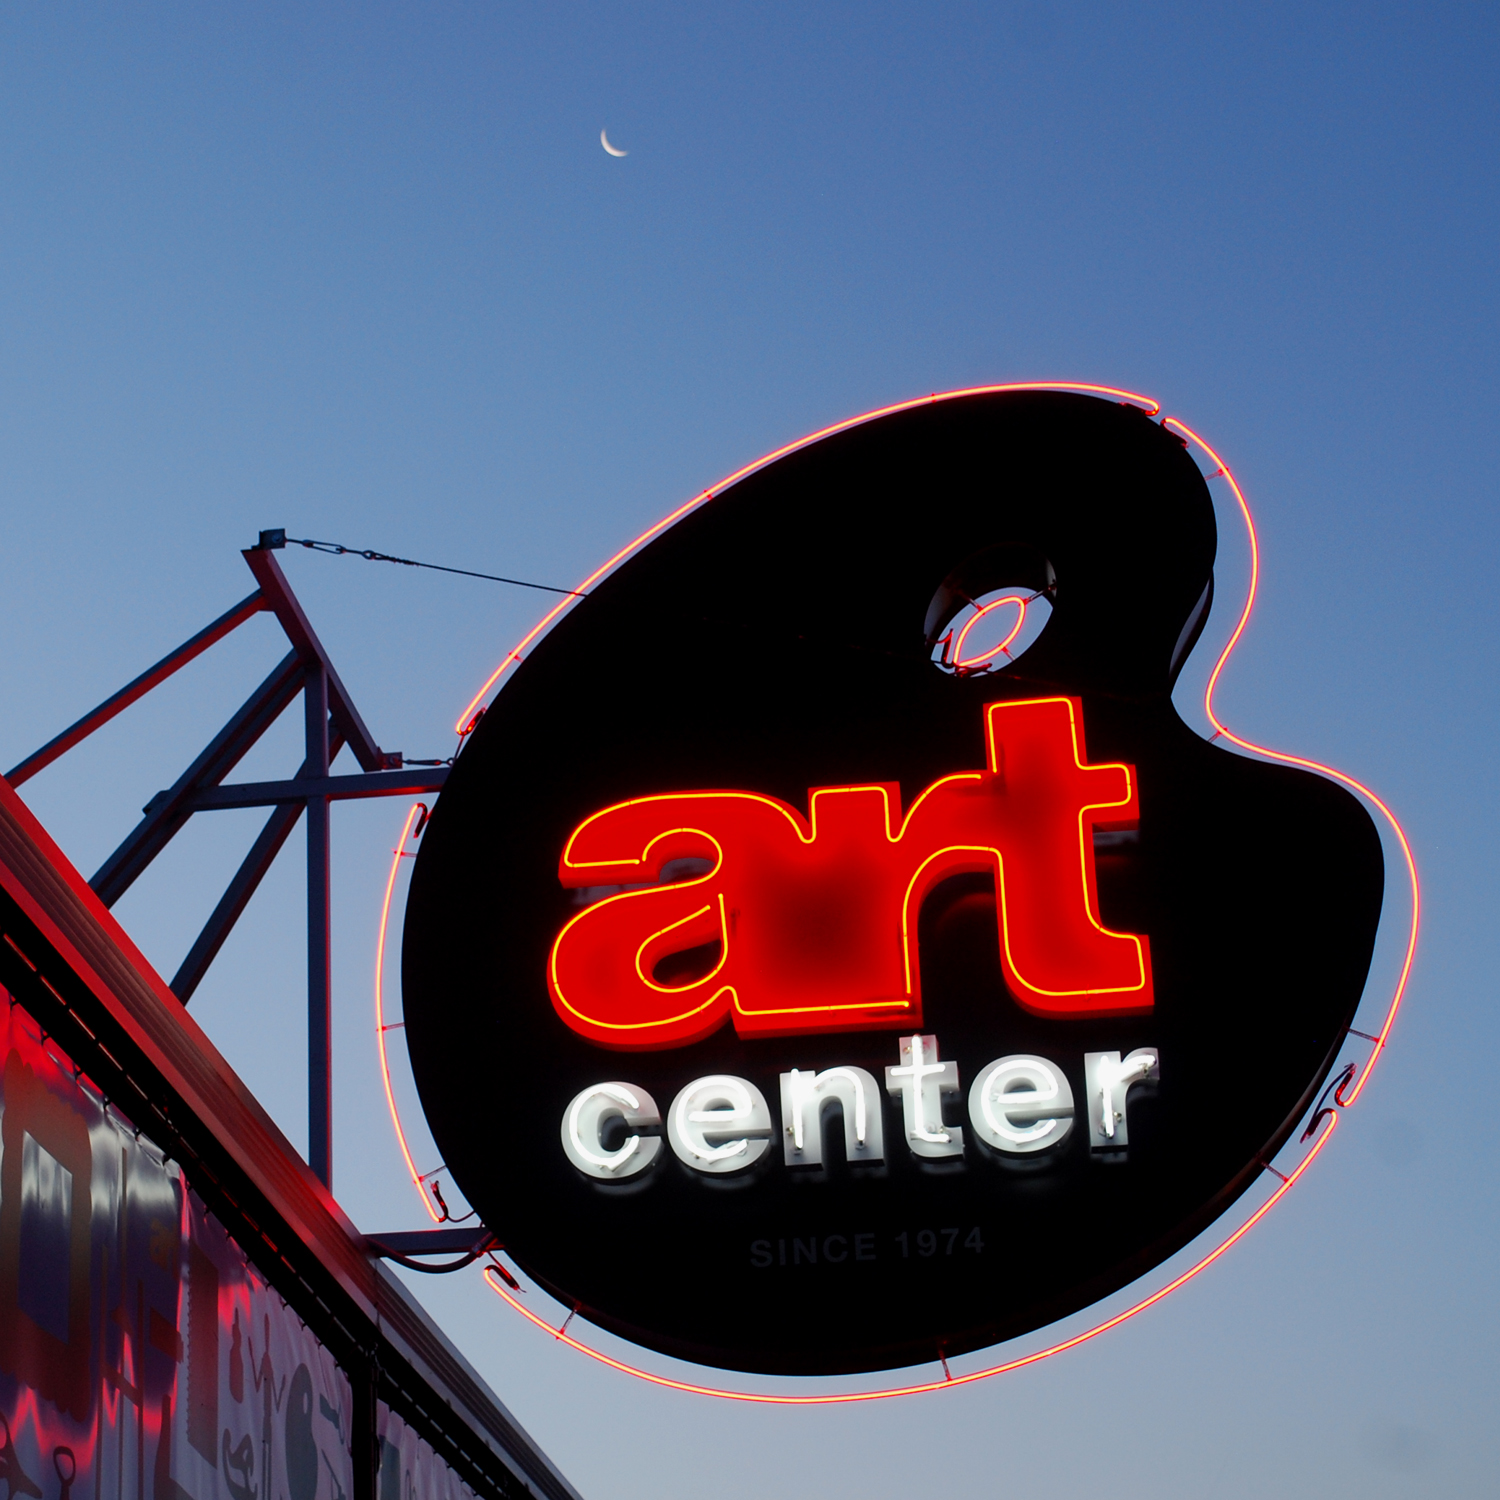  Art Center neon signage west face  Creative and design by Chuck Mitchell  Sign fabrication and installation by Frank Balton Sign Company, Memphis, TN 